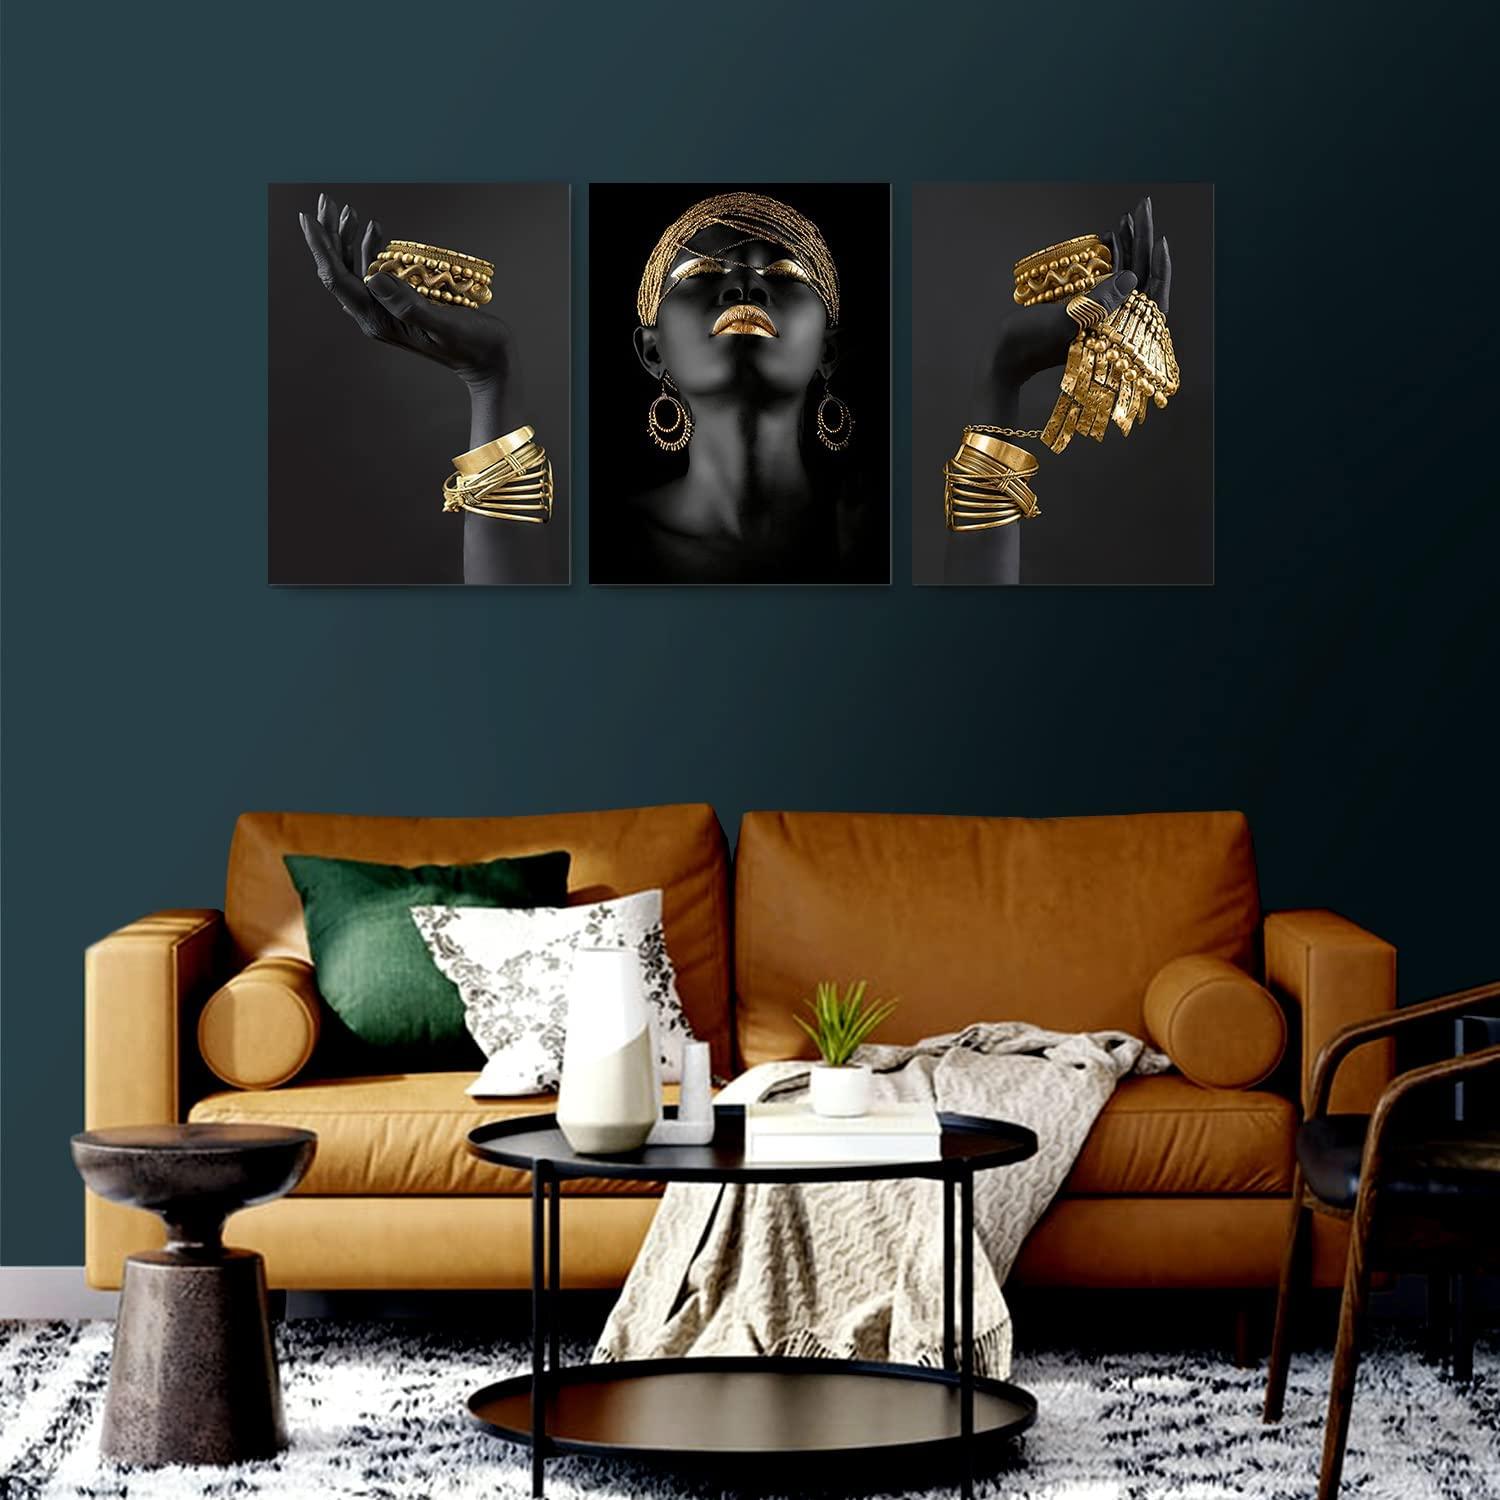 Black Gold African American Woman Canvas Wall Art, 3 Piece Set Fashion Golden Jewellery Print Picture Artwork, Modern Framed Poster Girl Bedroom Living Room Home Decorations, 12" X 16" X 3